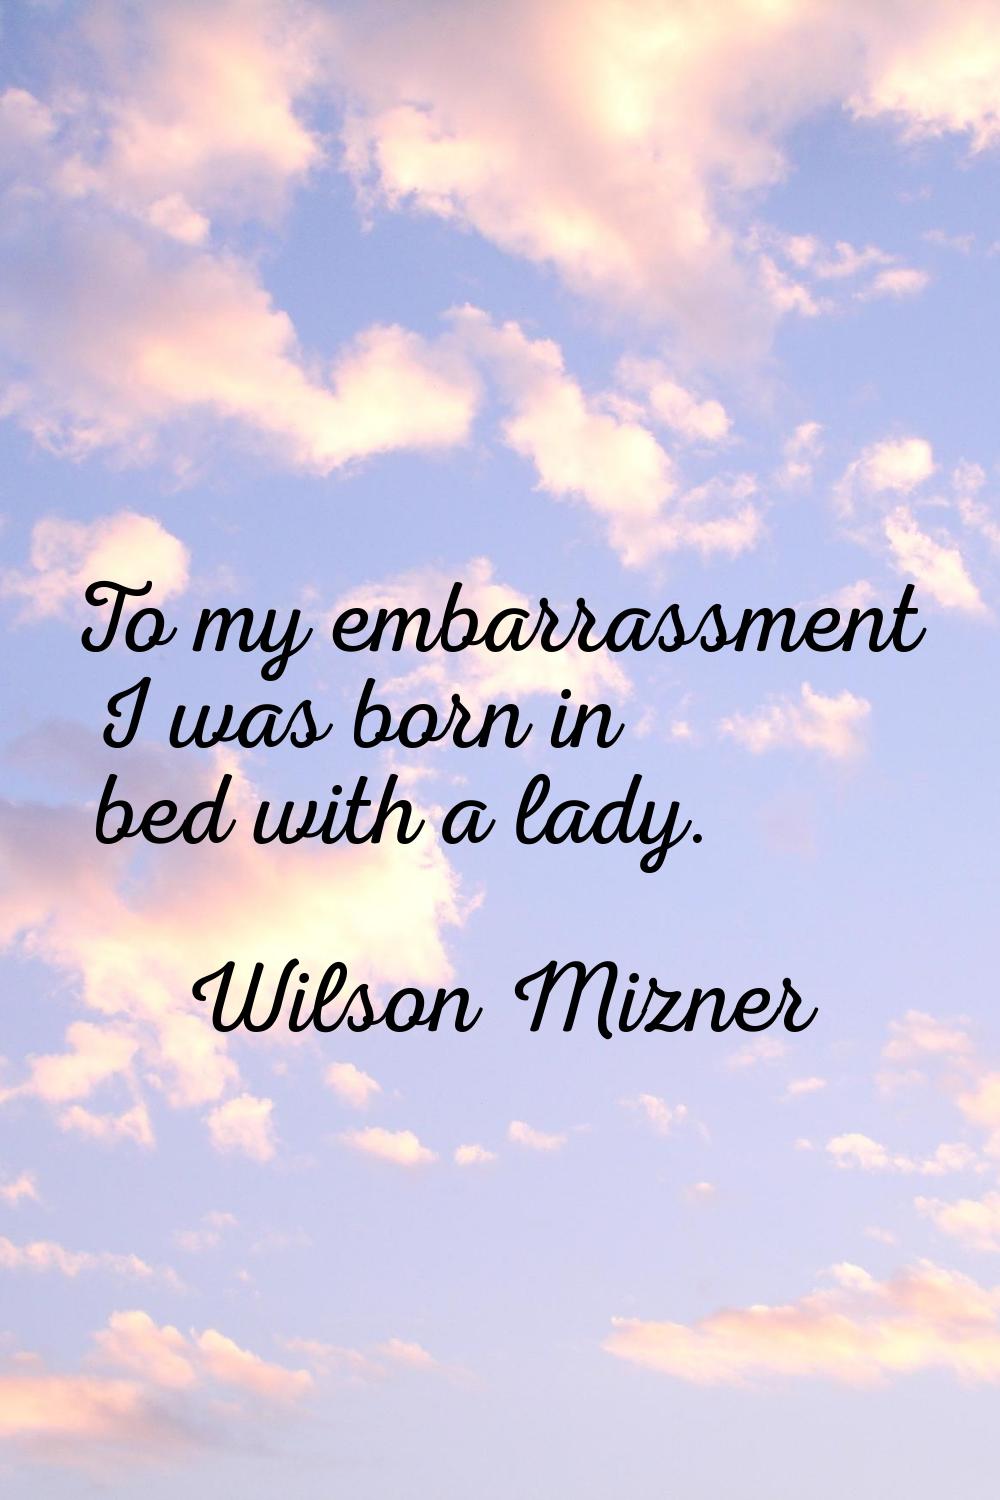 To my embarrassment I was born in bed with a lady.